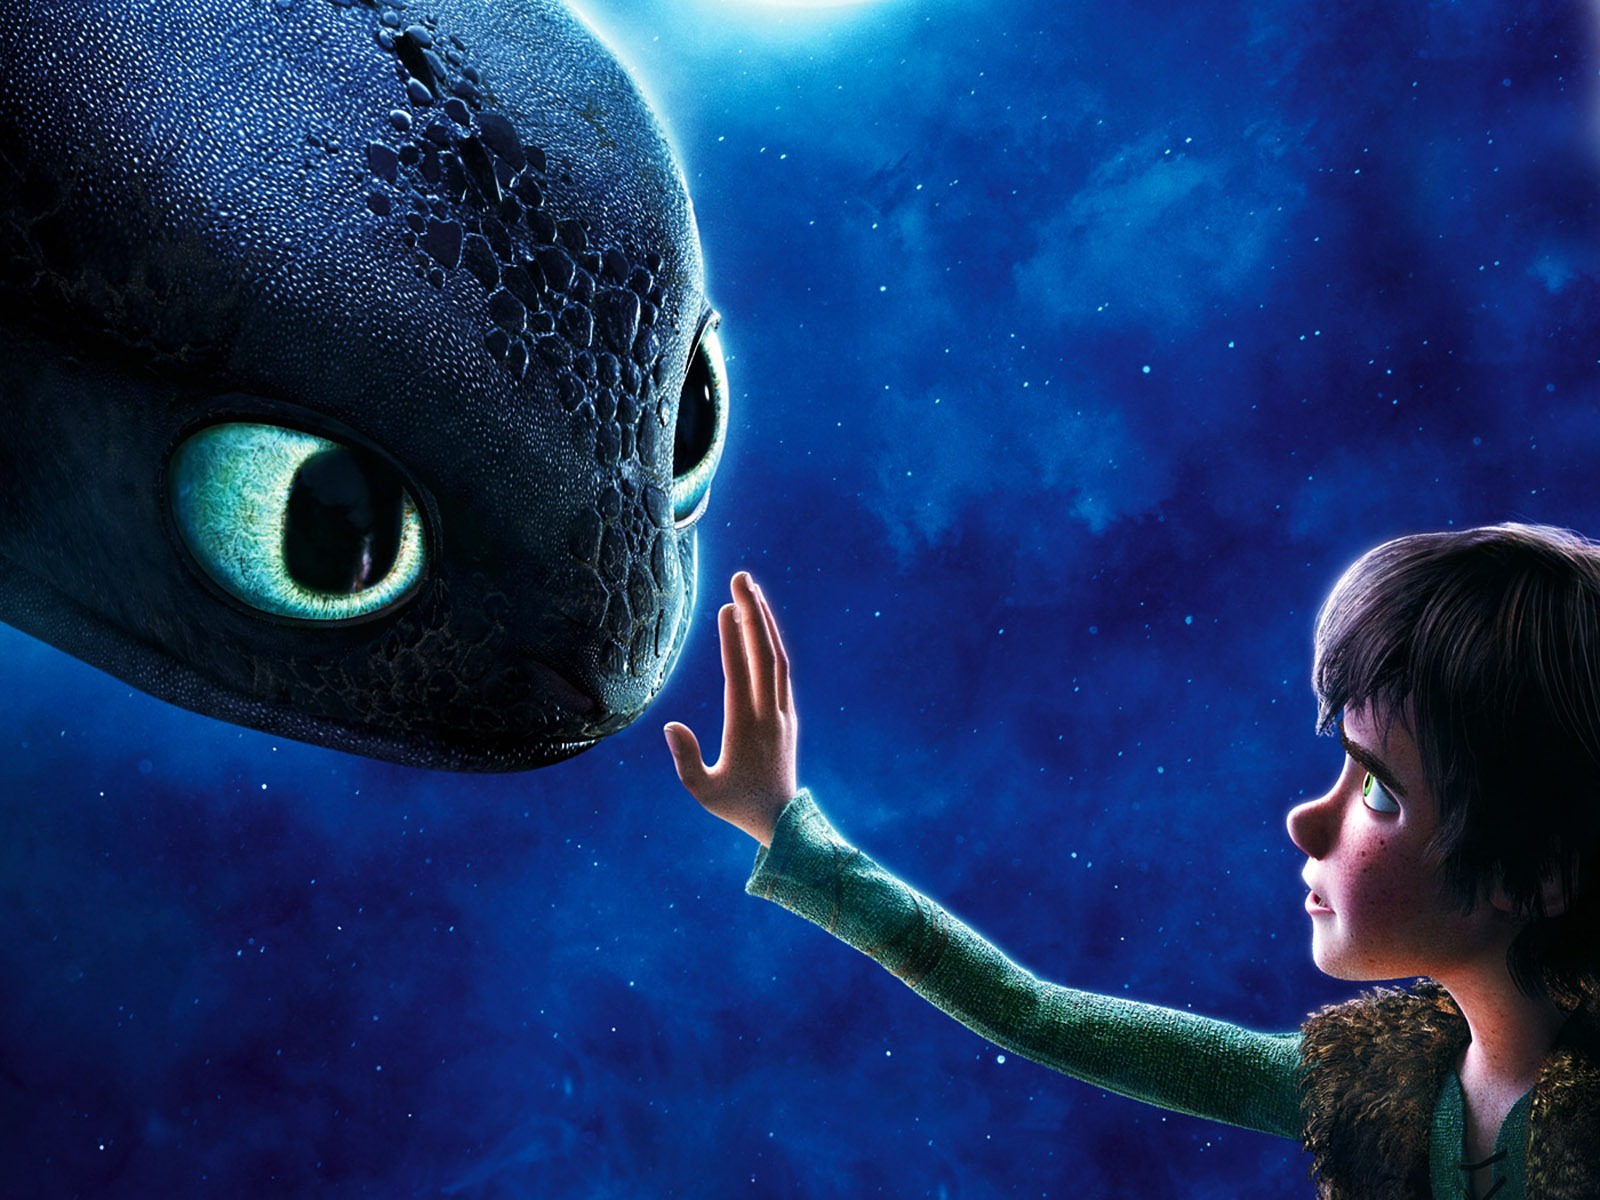 How to Train Your Dragon HD wallpaper #7 - 1600x1200